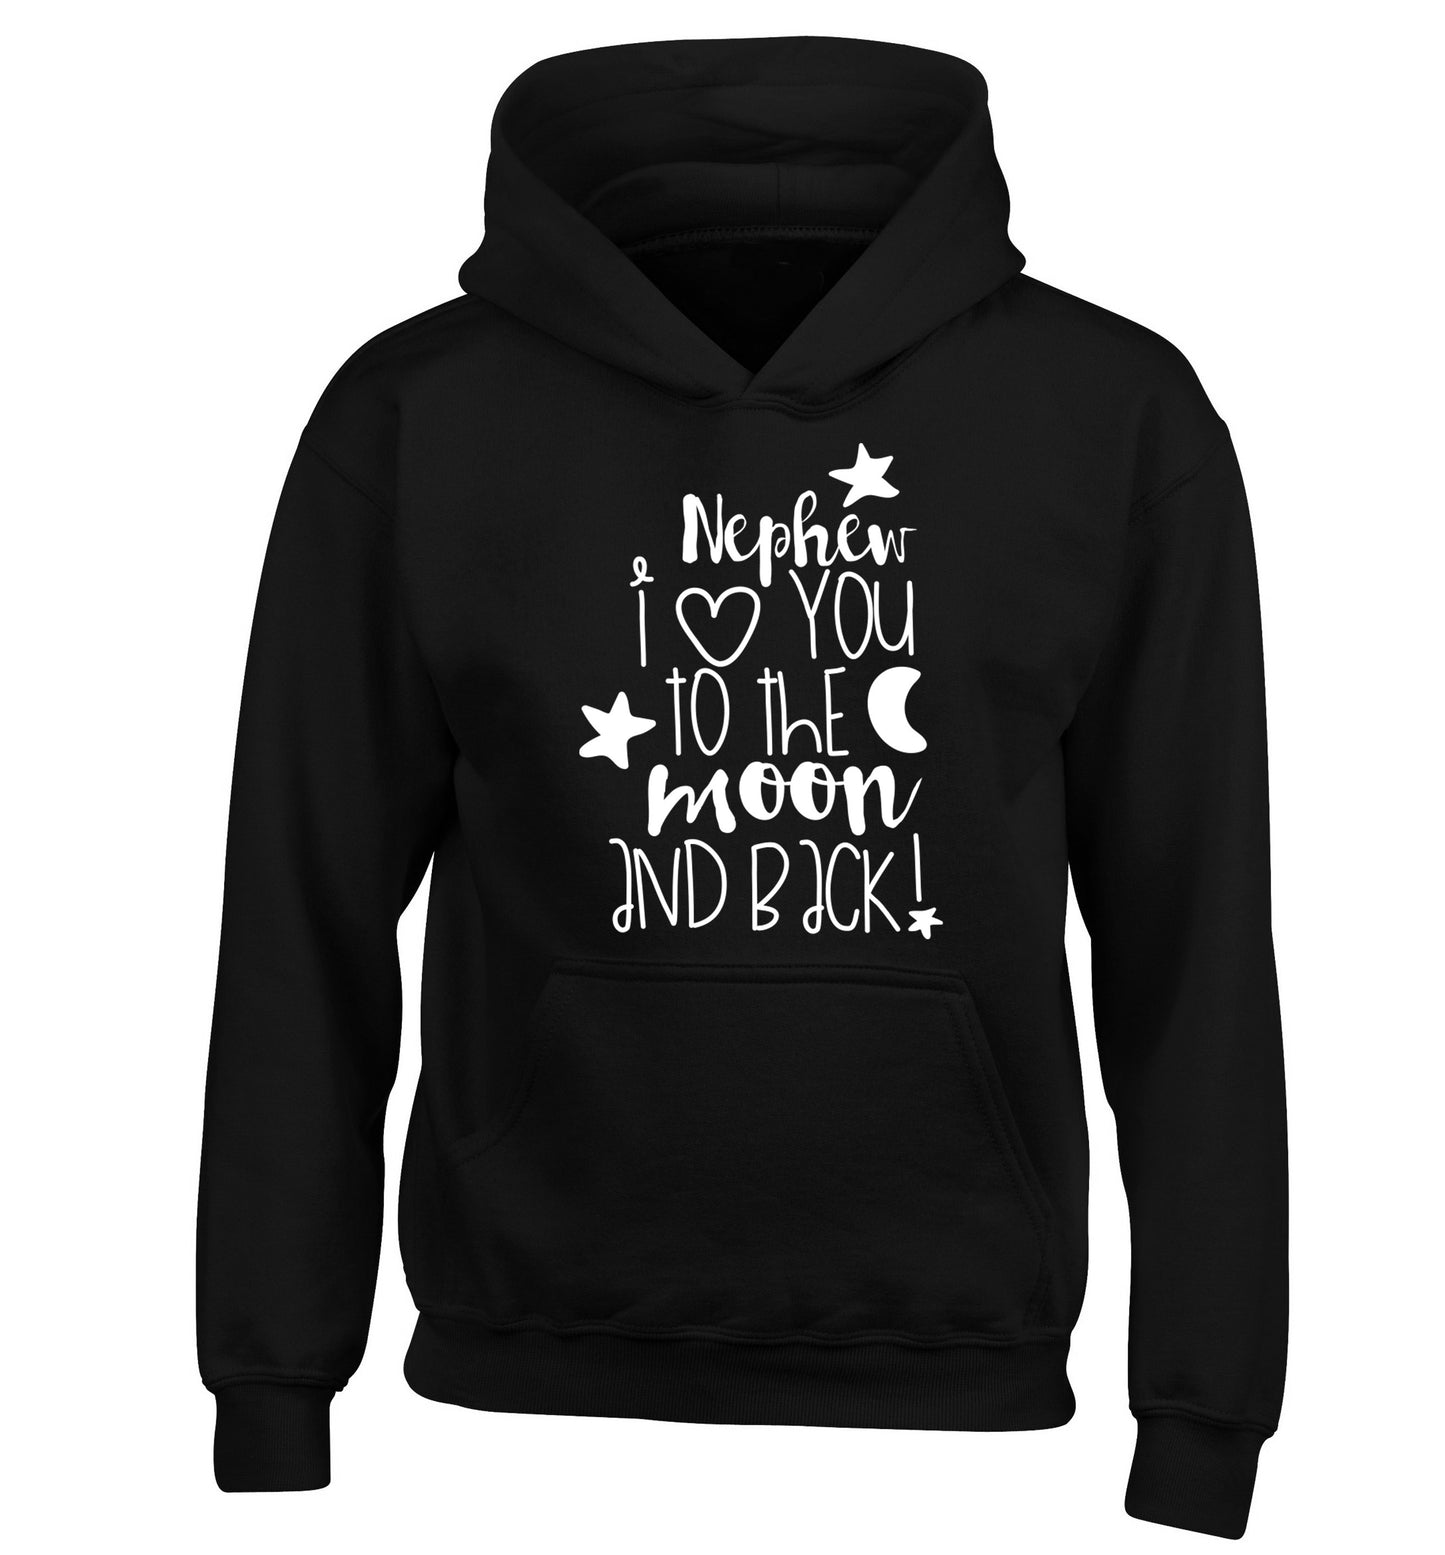 Nephew I love you to the moon and back children's black hoodie 12-14 Years